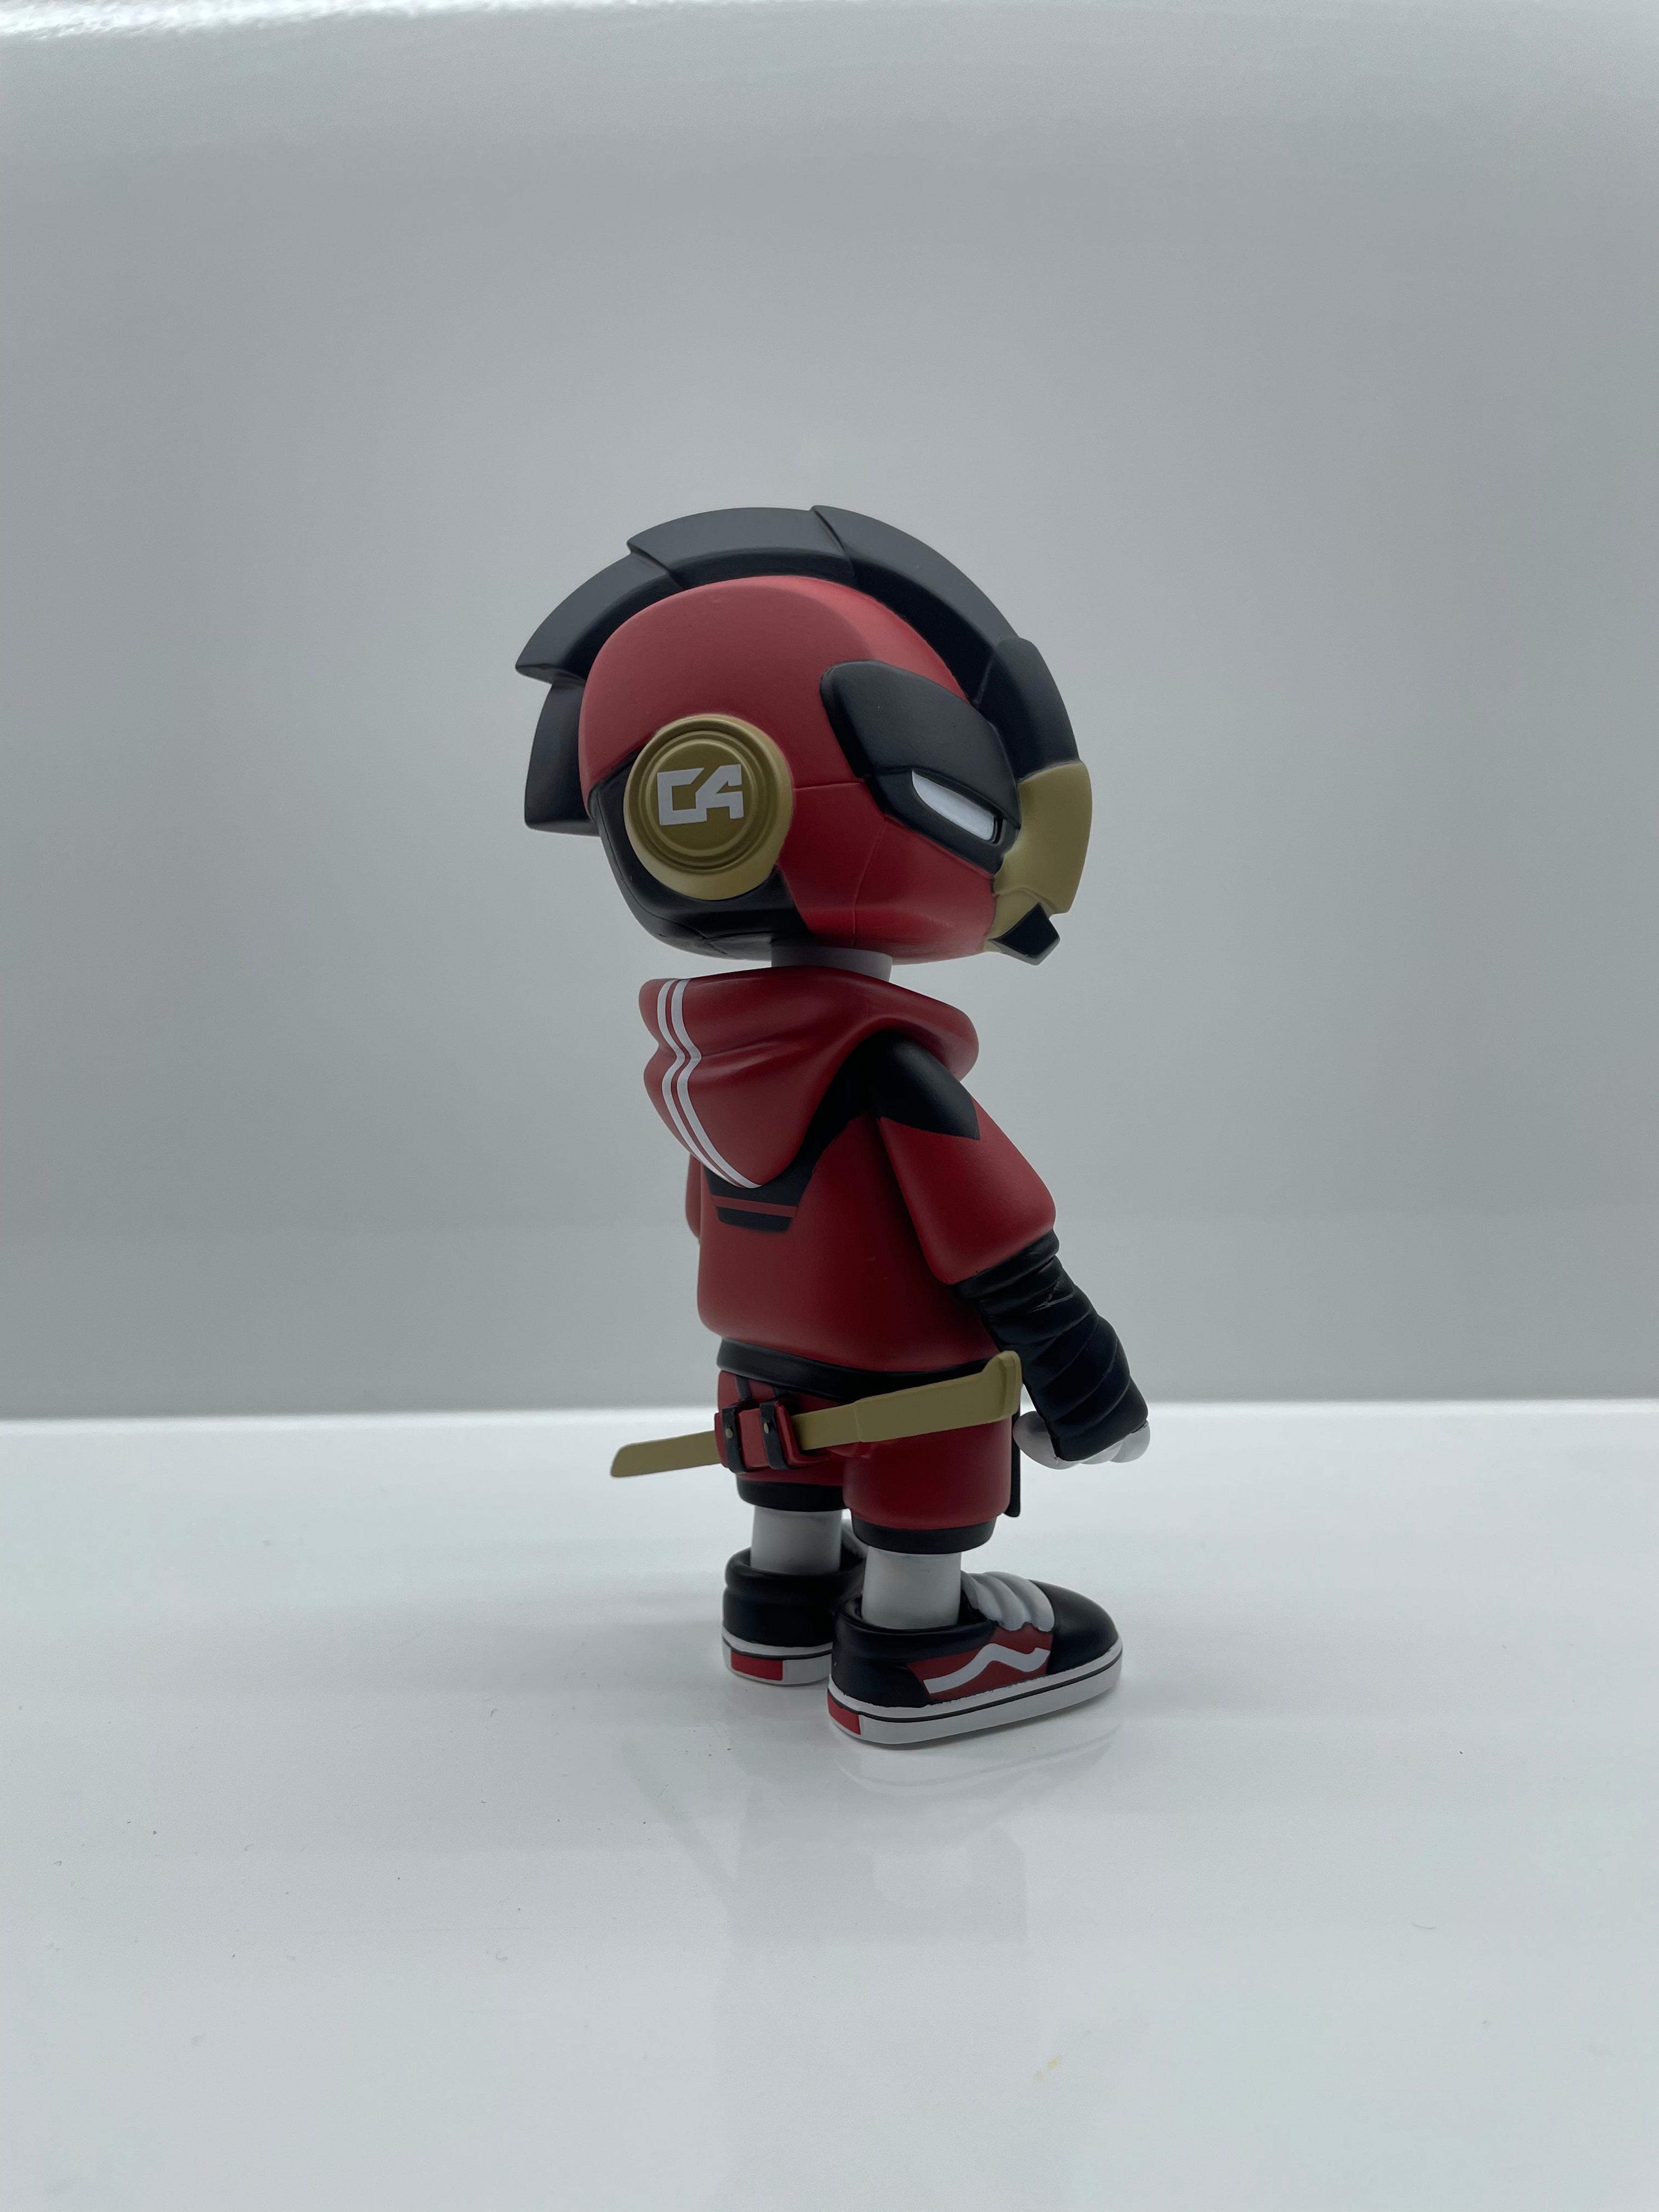 Alternate View 9 of C4: Red Talon by ChknHead Creon x Martian Toys